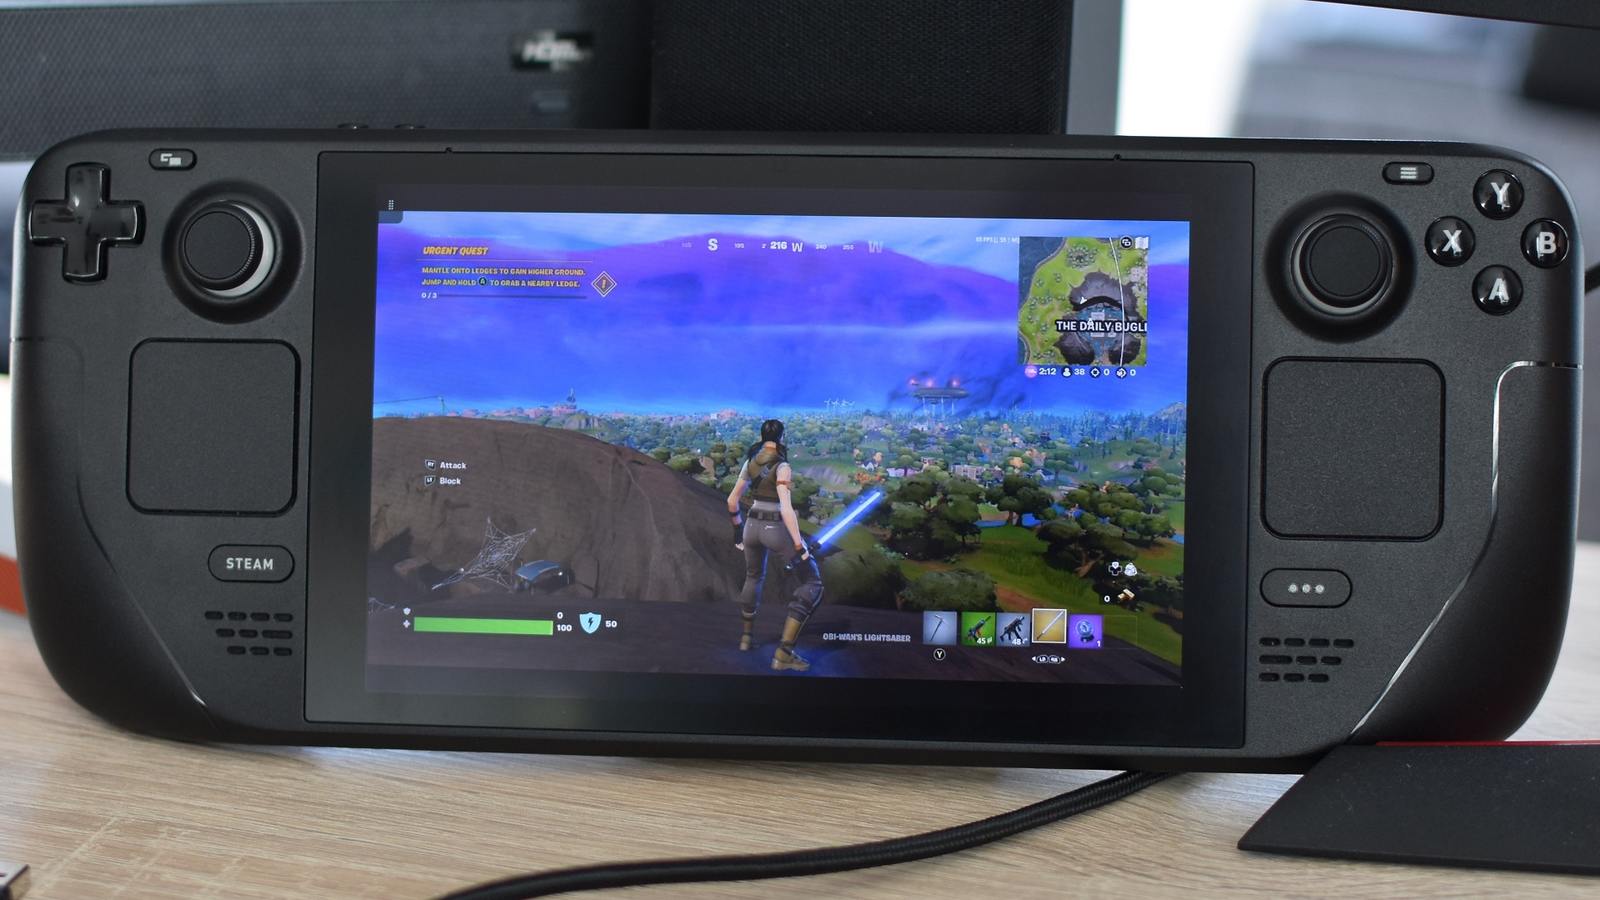 Fortnite added to Xbox Cloud Gaming, easier than ever to play on Steam Deck